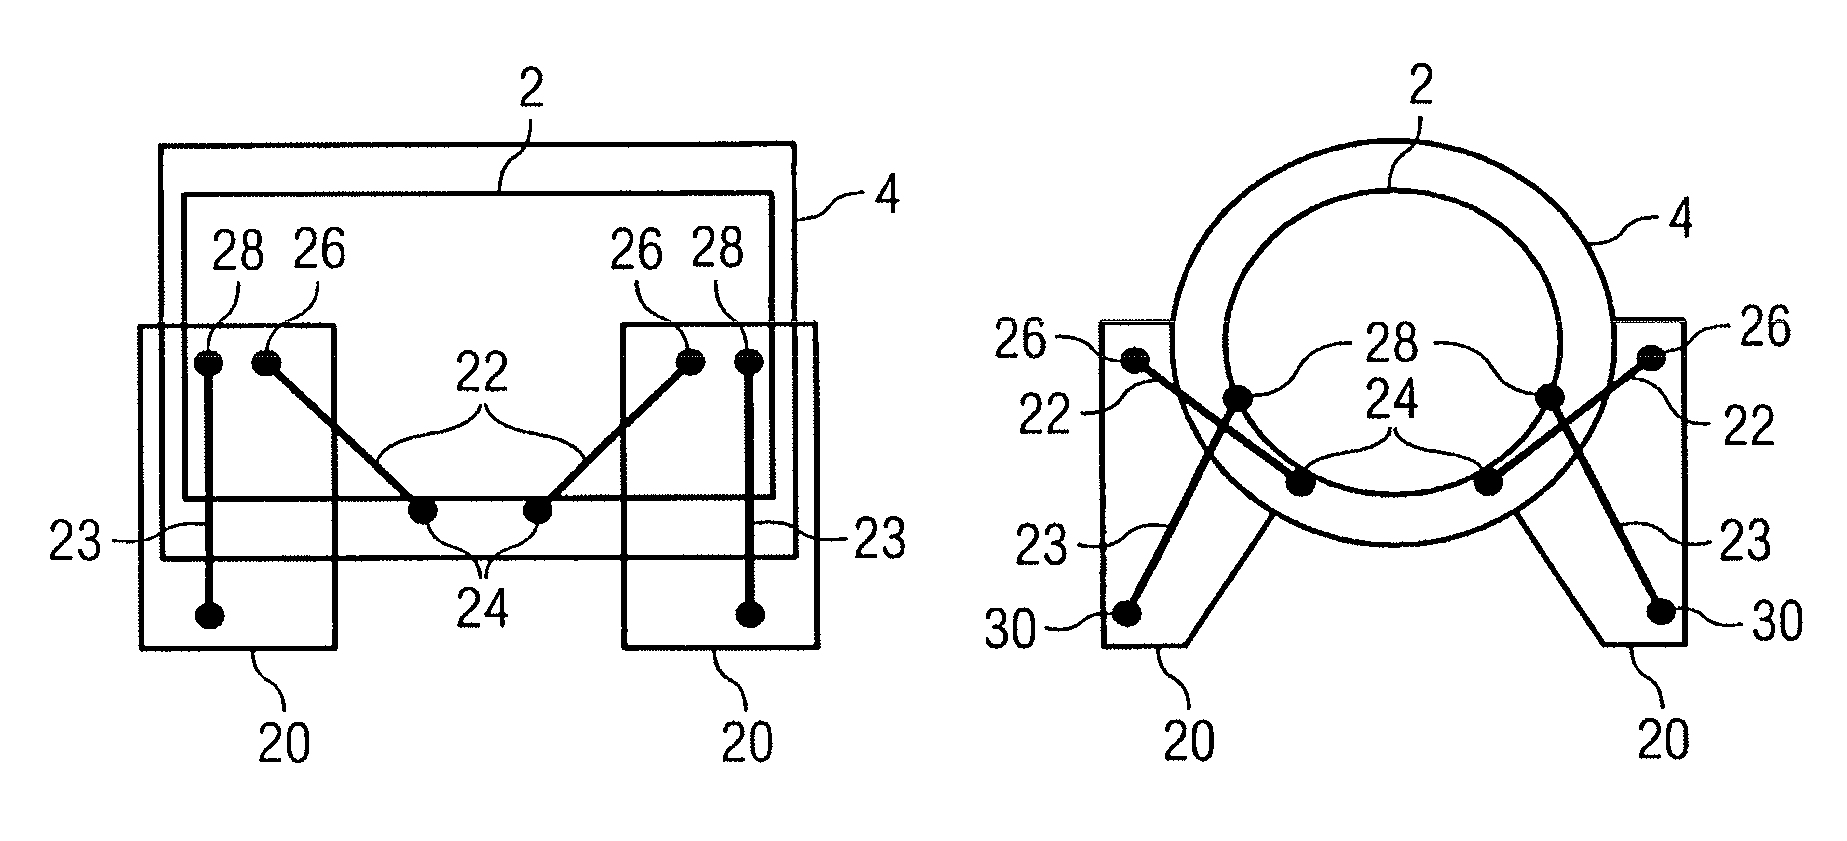 Cryostat comprising a cryogen vessel suspended within an outer vacuum container